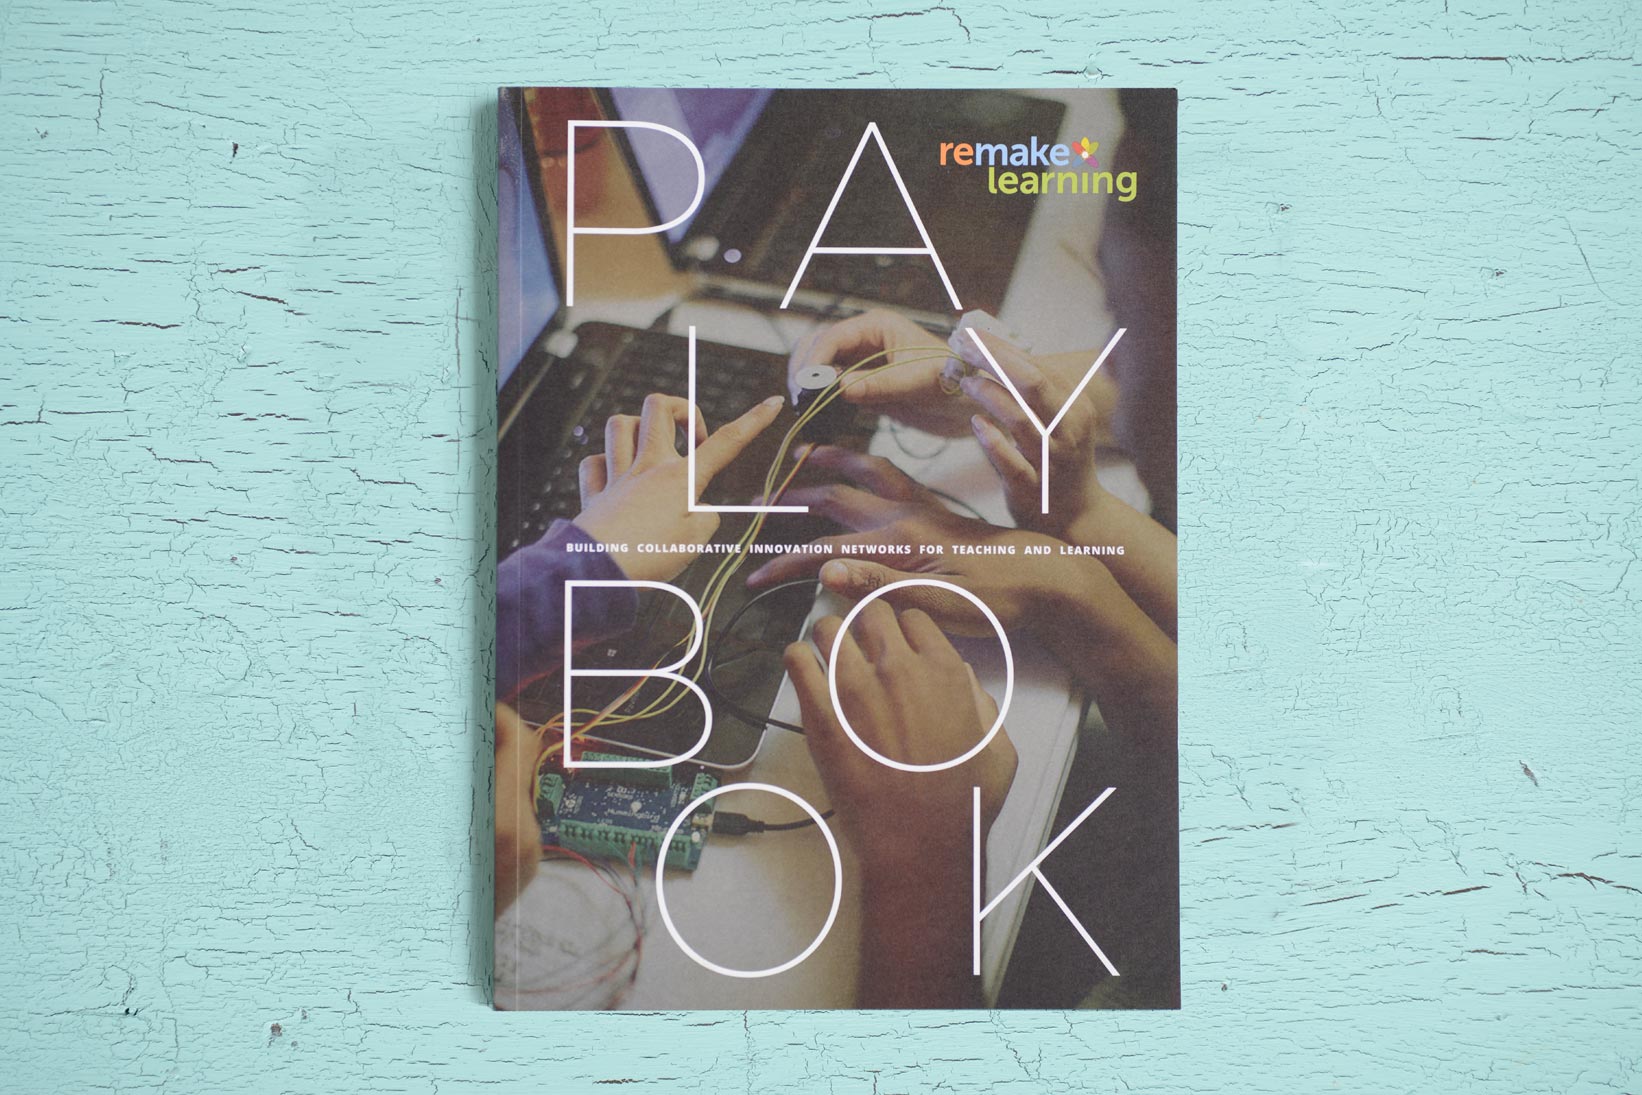 The cover of the Remake Learning Playbook with an image of kids working with circuitry